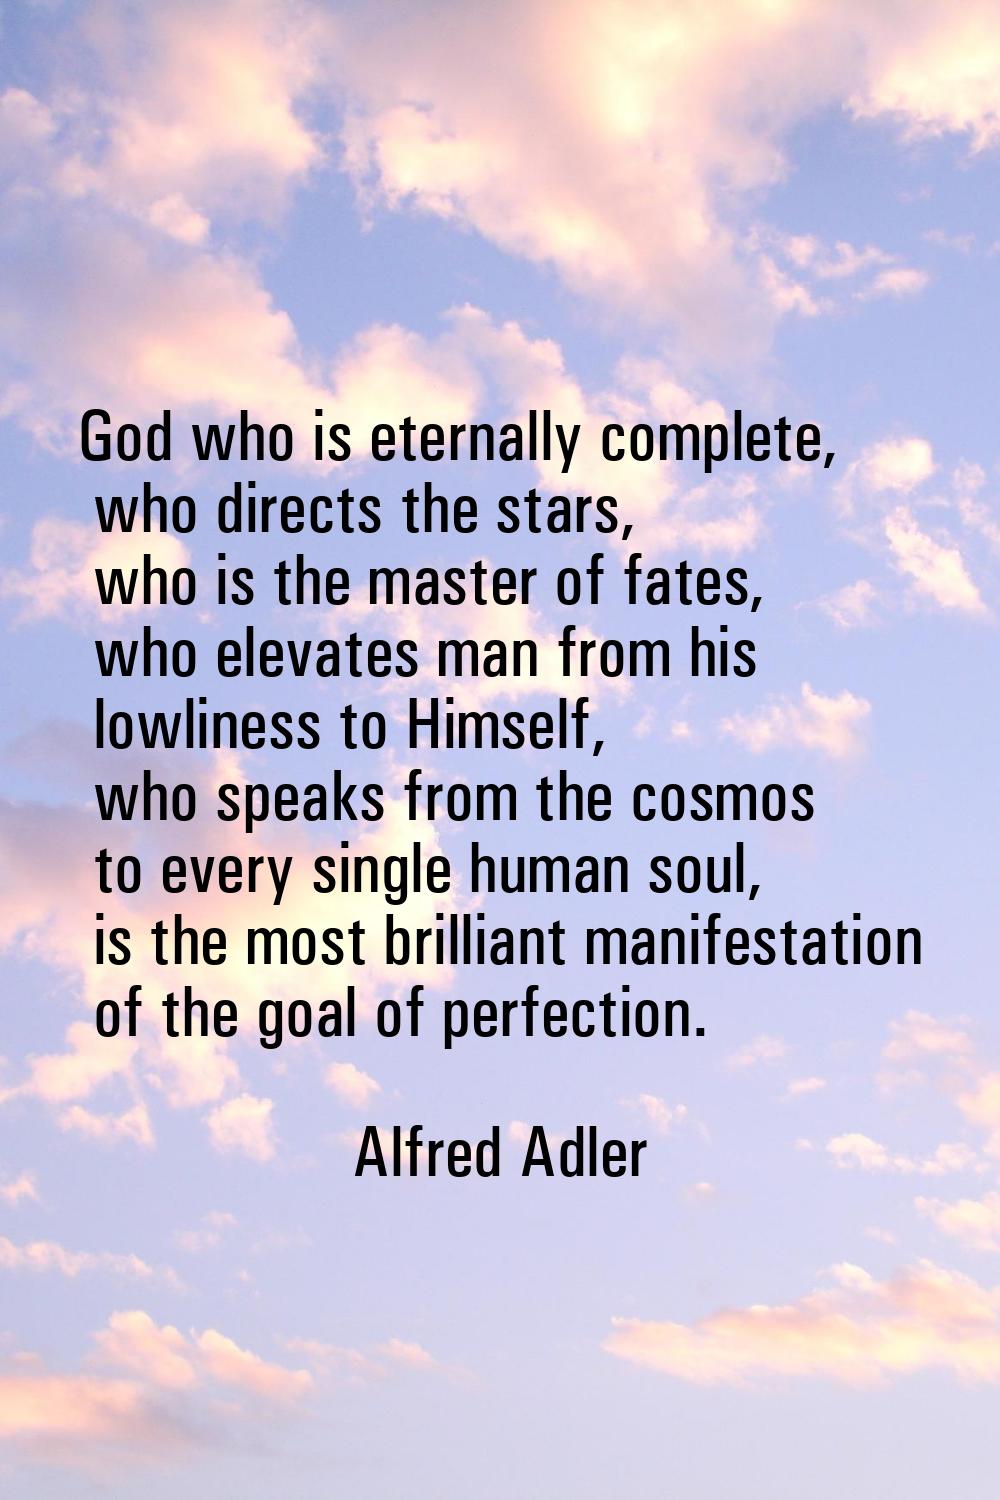 God who is eternally complete, who directs the stars, who is the master of fates, who elevates man 